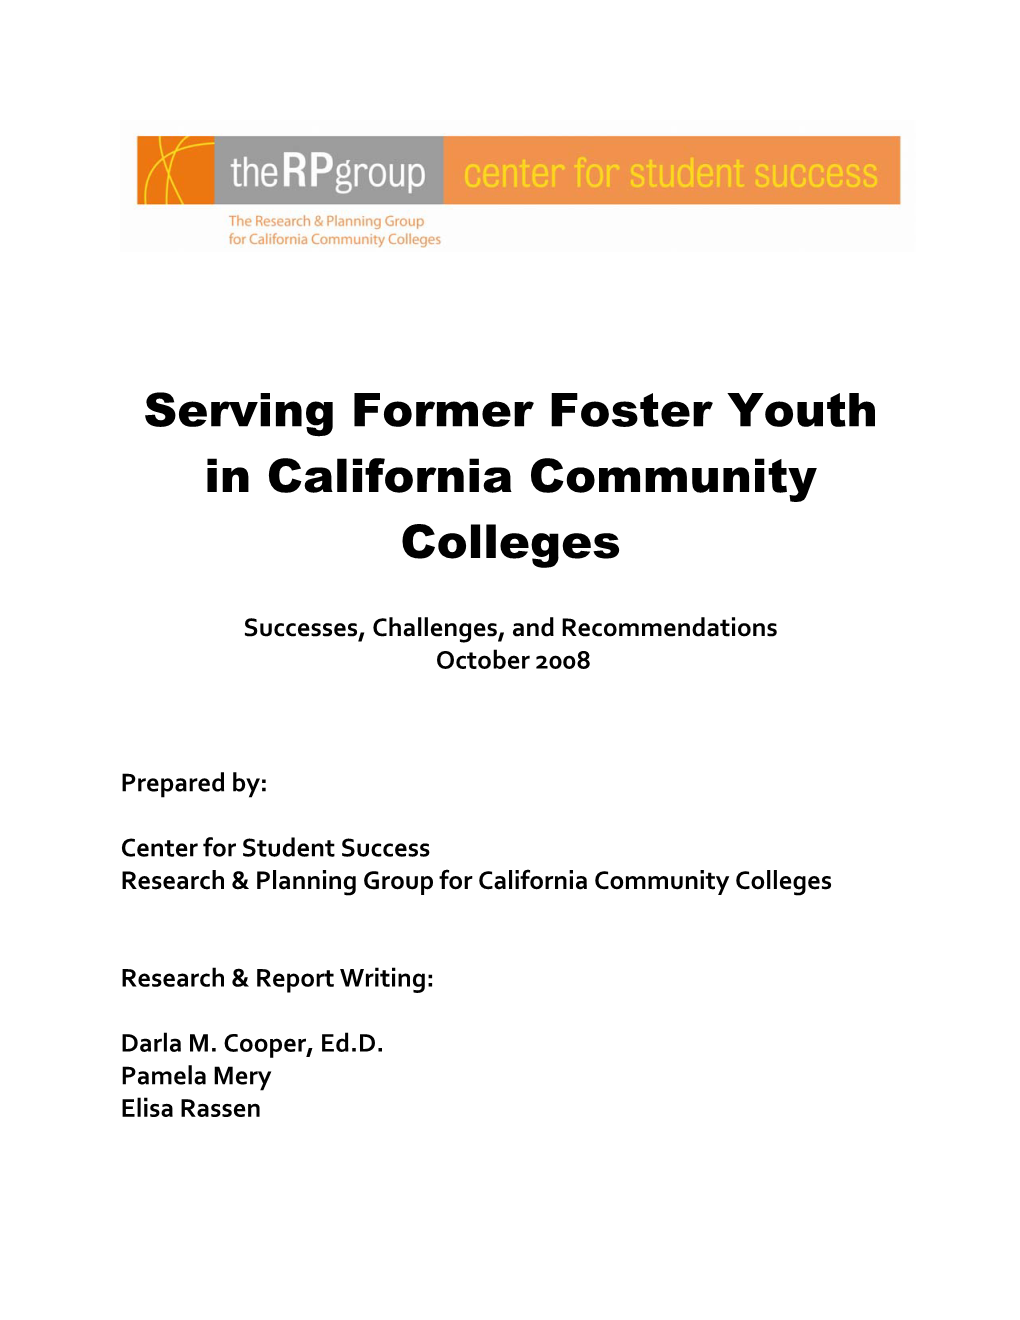 Serving Former Foster Youth in California Community Colleges